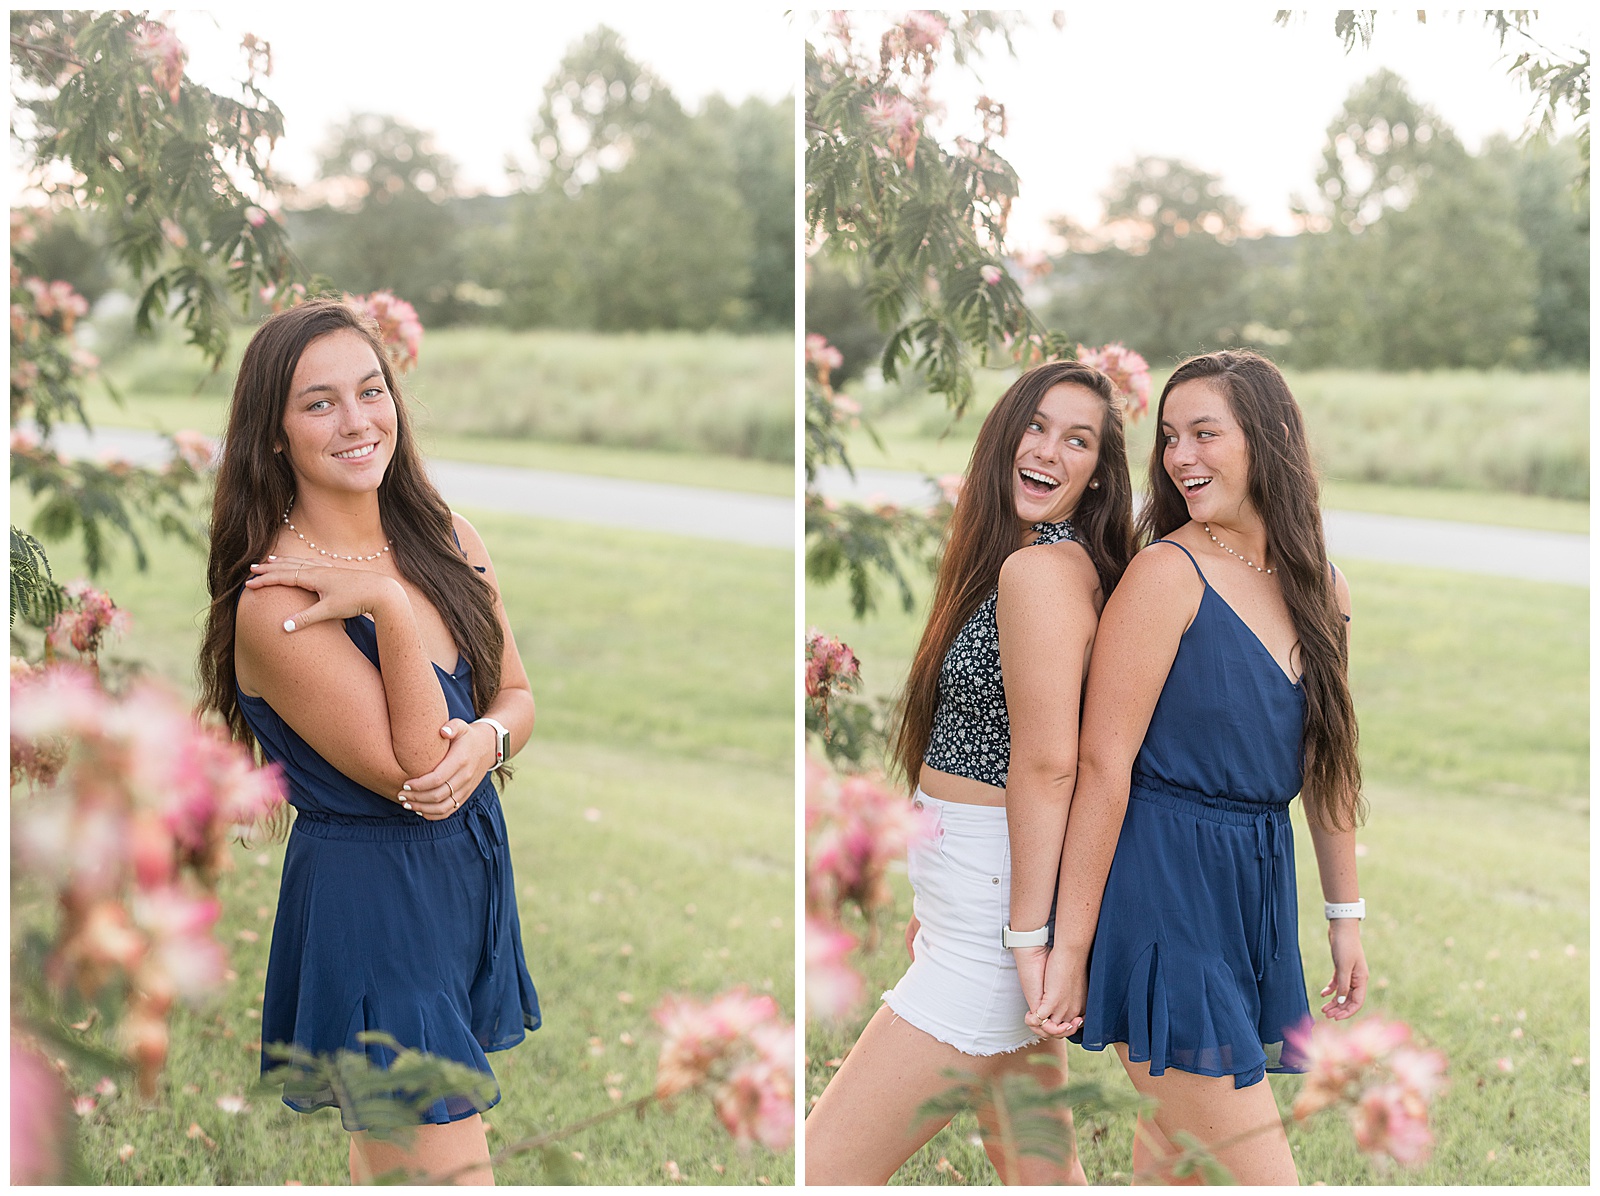 girls back to back looking at each other smiling by trees and flowers on summer evening